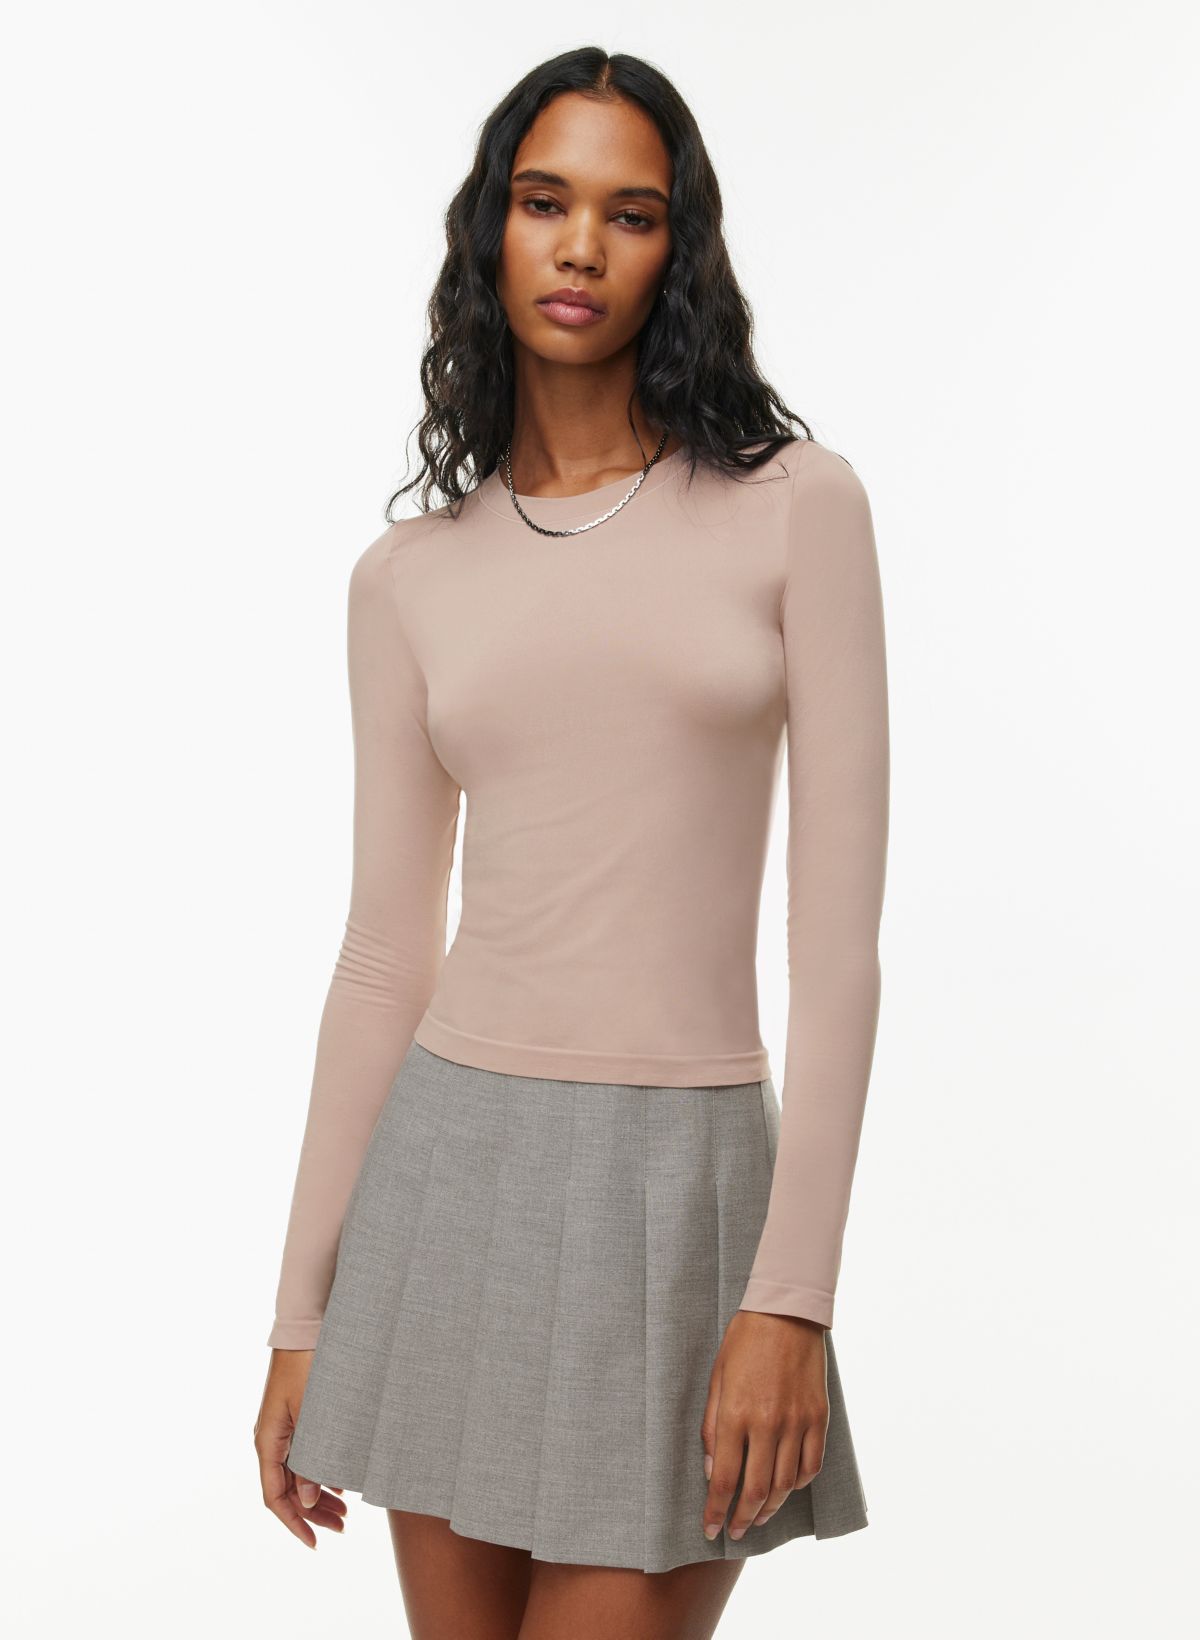 Moa Moa Seamless Long Sleeve Top at Dry Goods